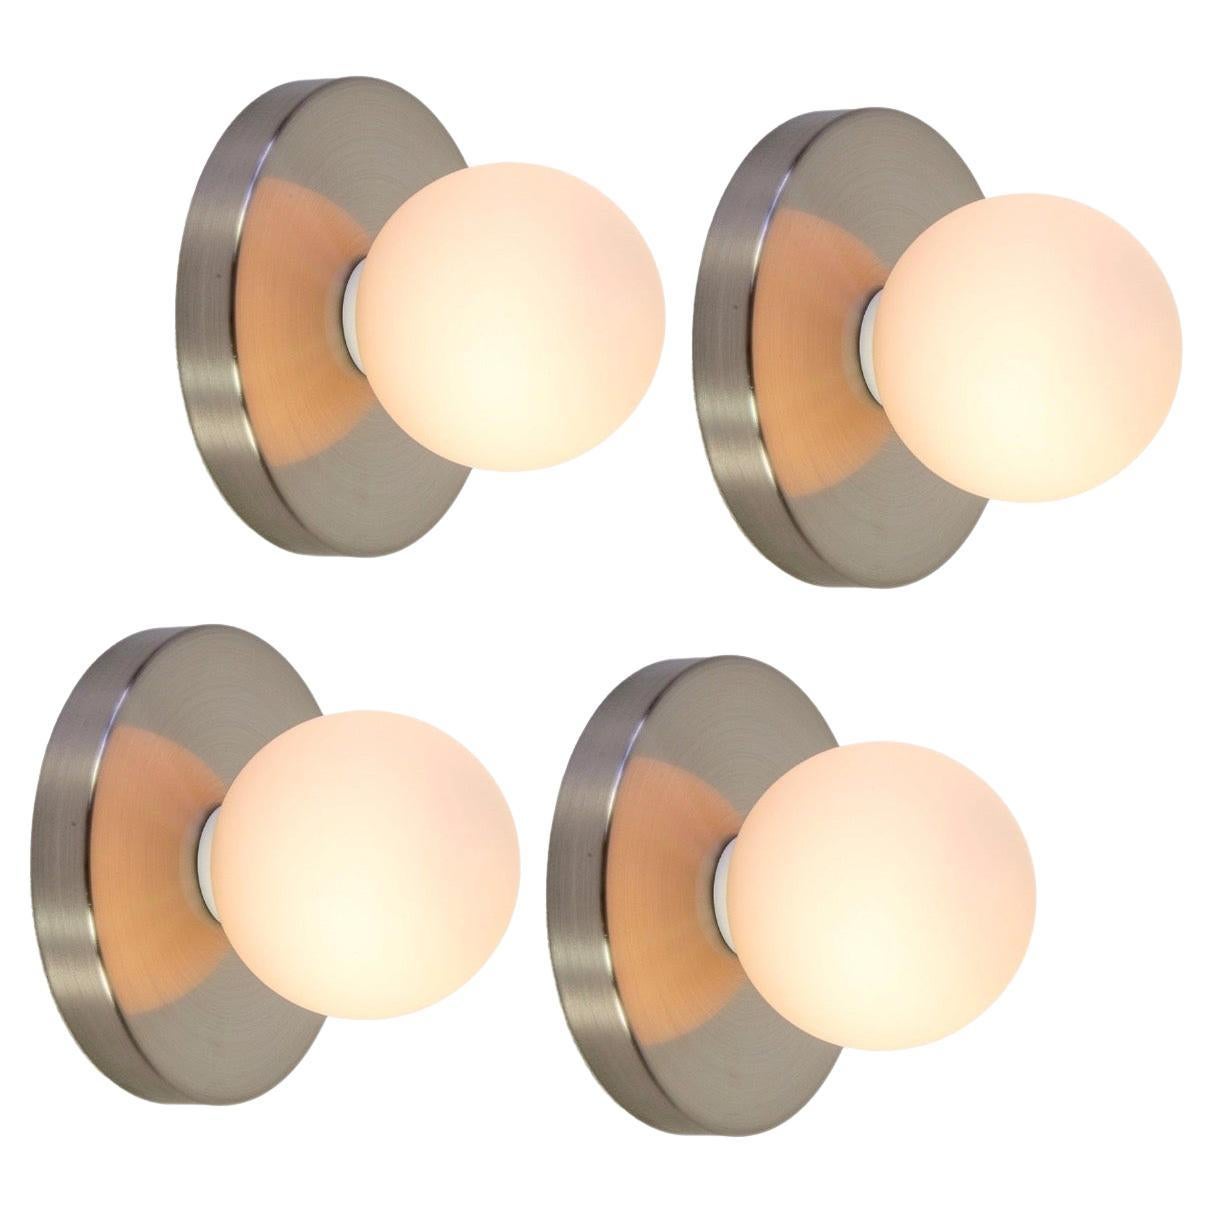 Set of 4 Globe Sconces by Research.Lighting, Brushed Nickel, Made to Order For Sale